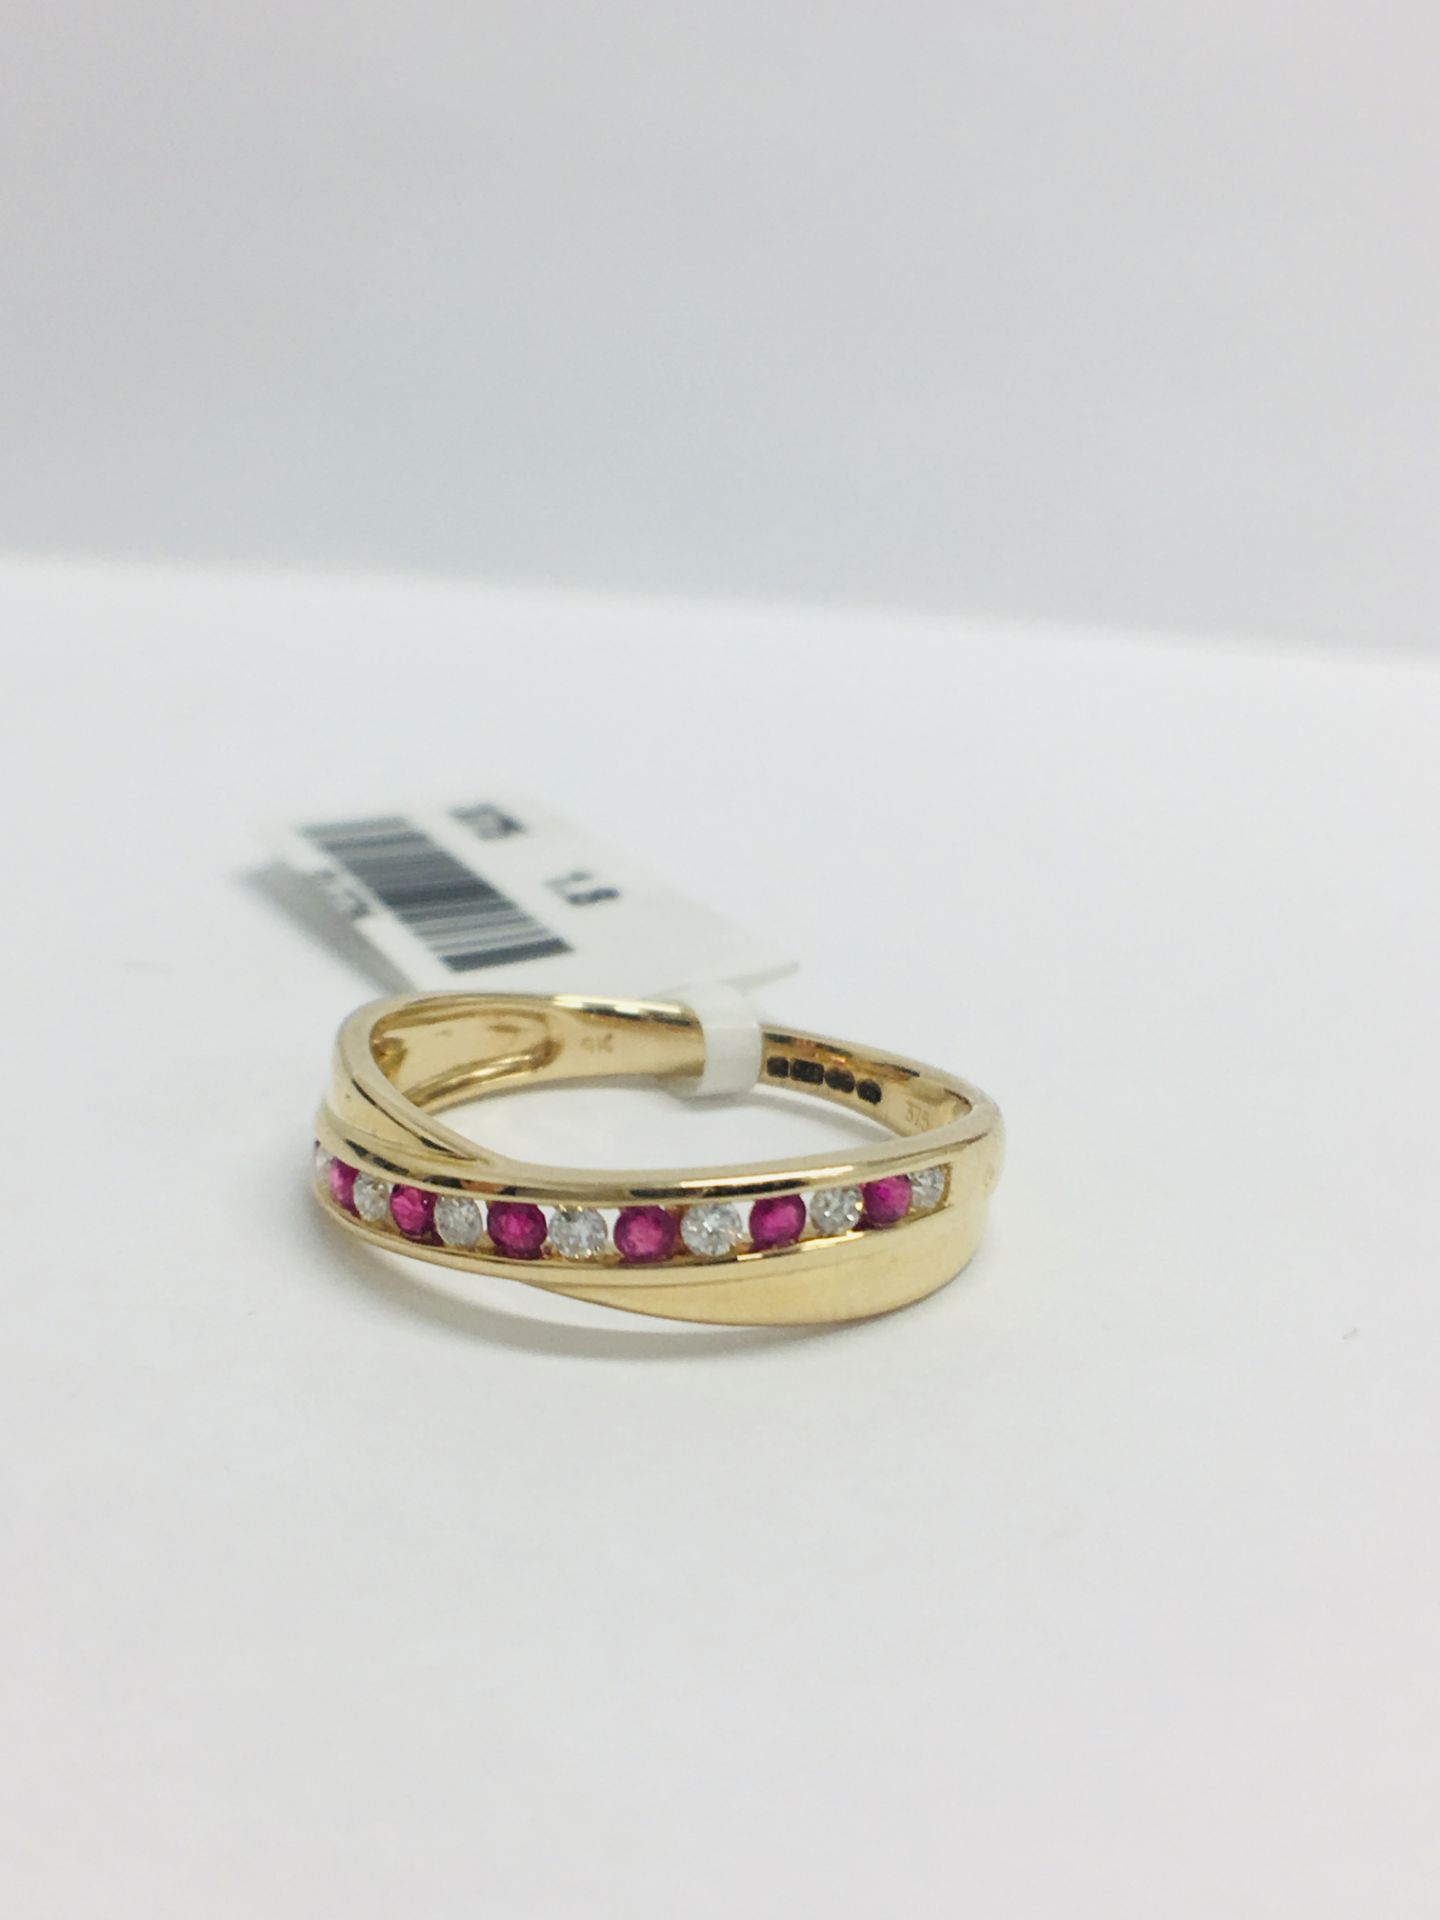 9ct Yellow Gold Ruby Diamond Crossover Band Ring - Image 7 of 8